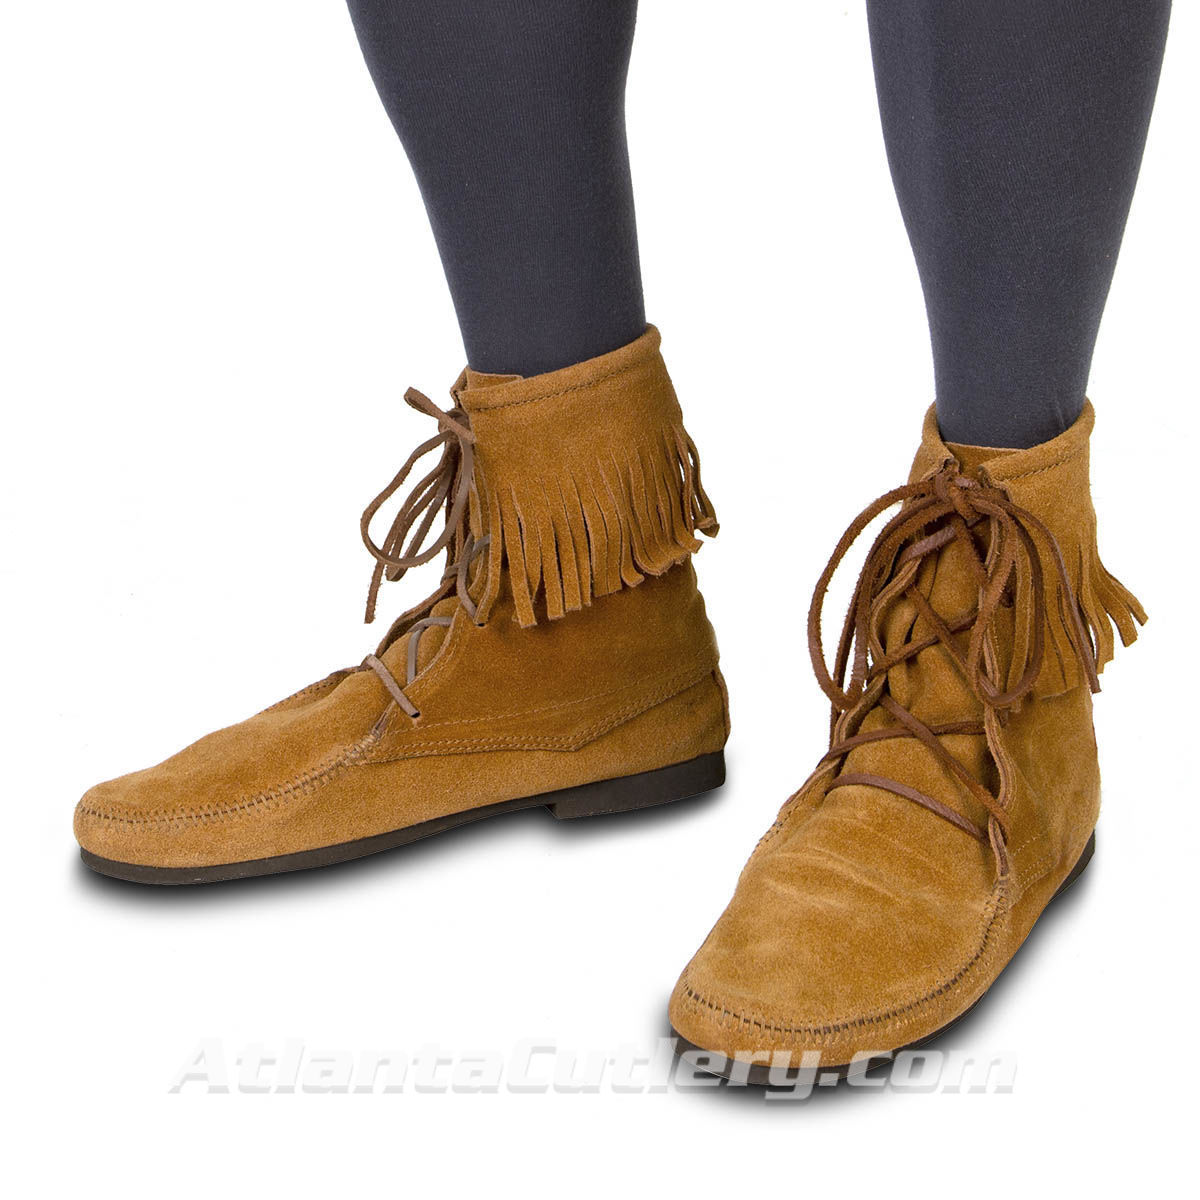 Brown suede boots with 1/8" thick cushioned insole and comfortable rubber sole so you can wear them all day long